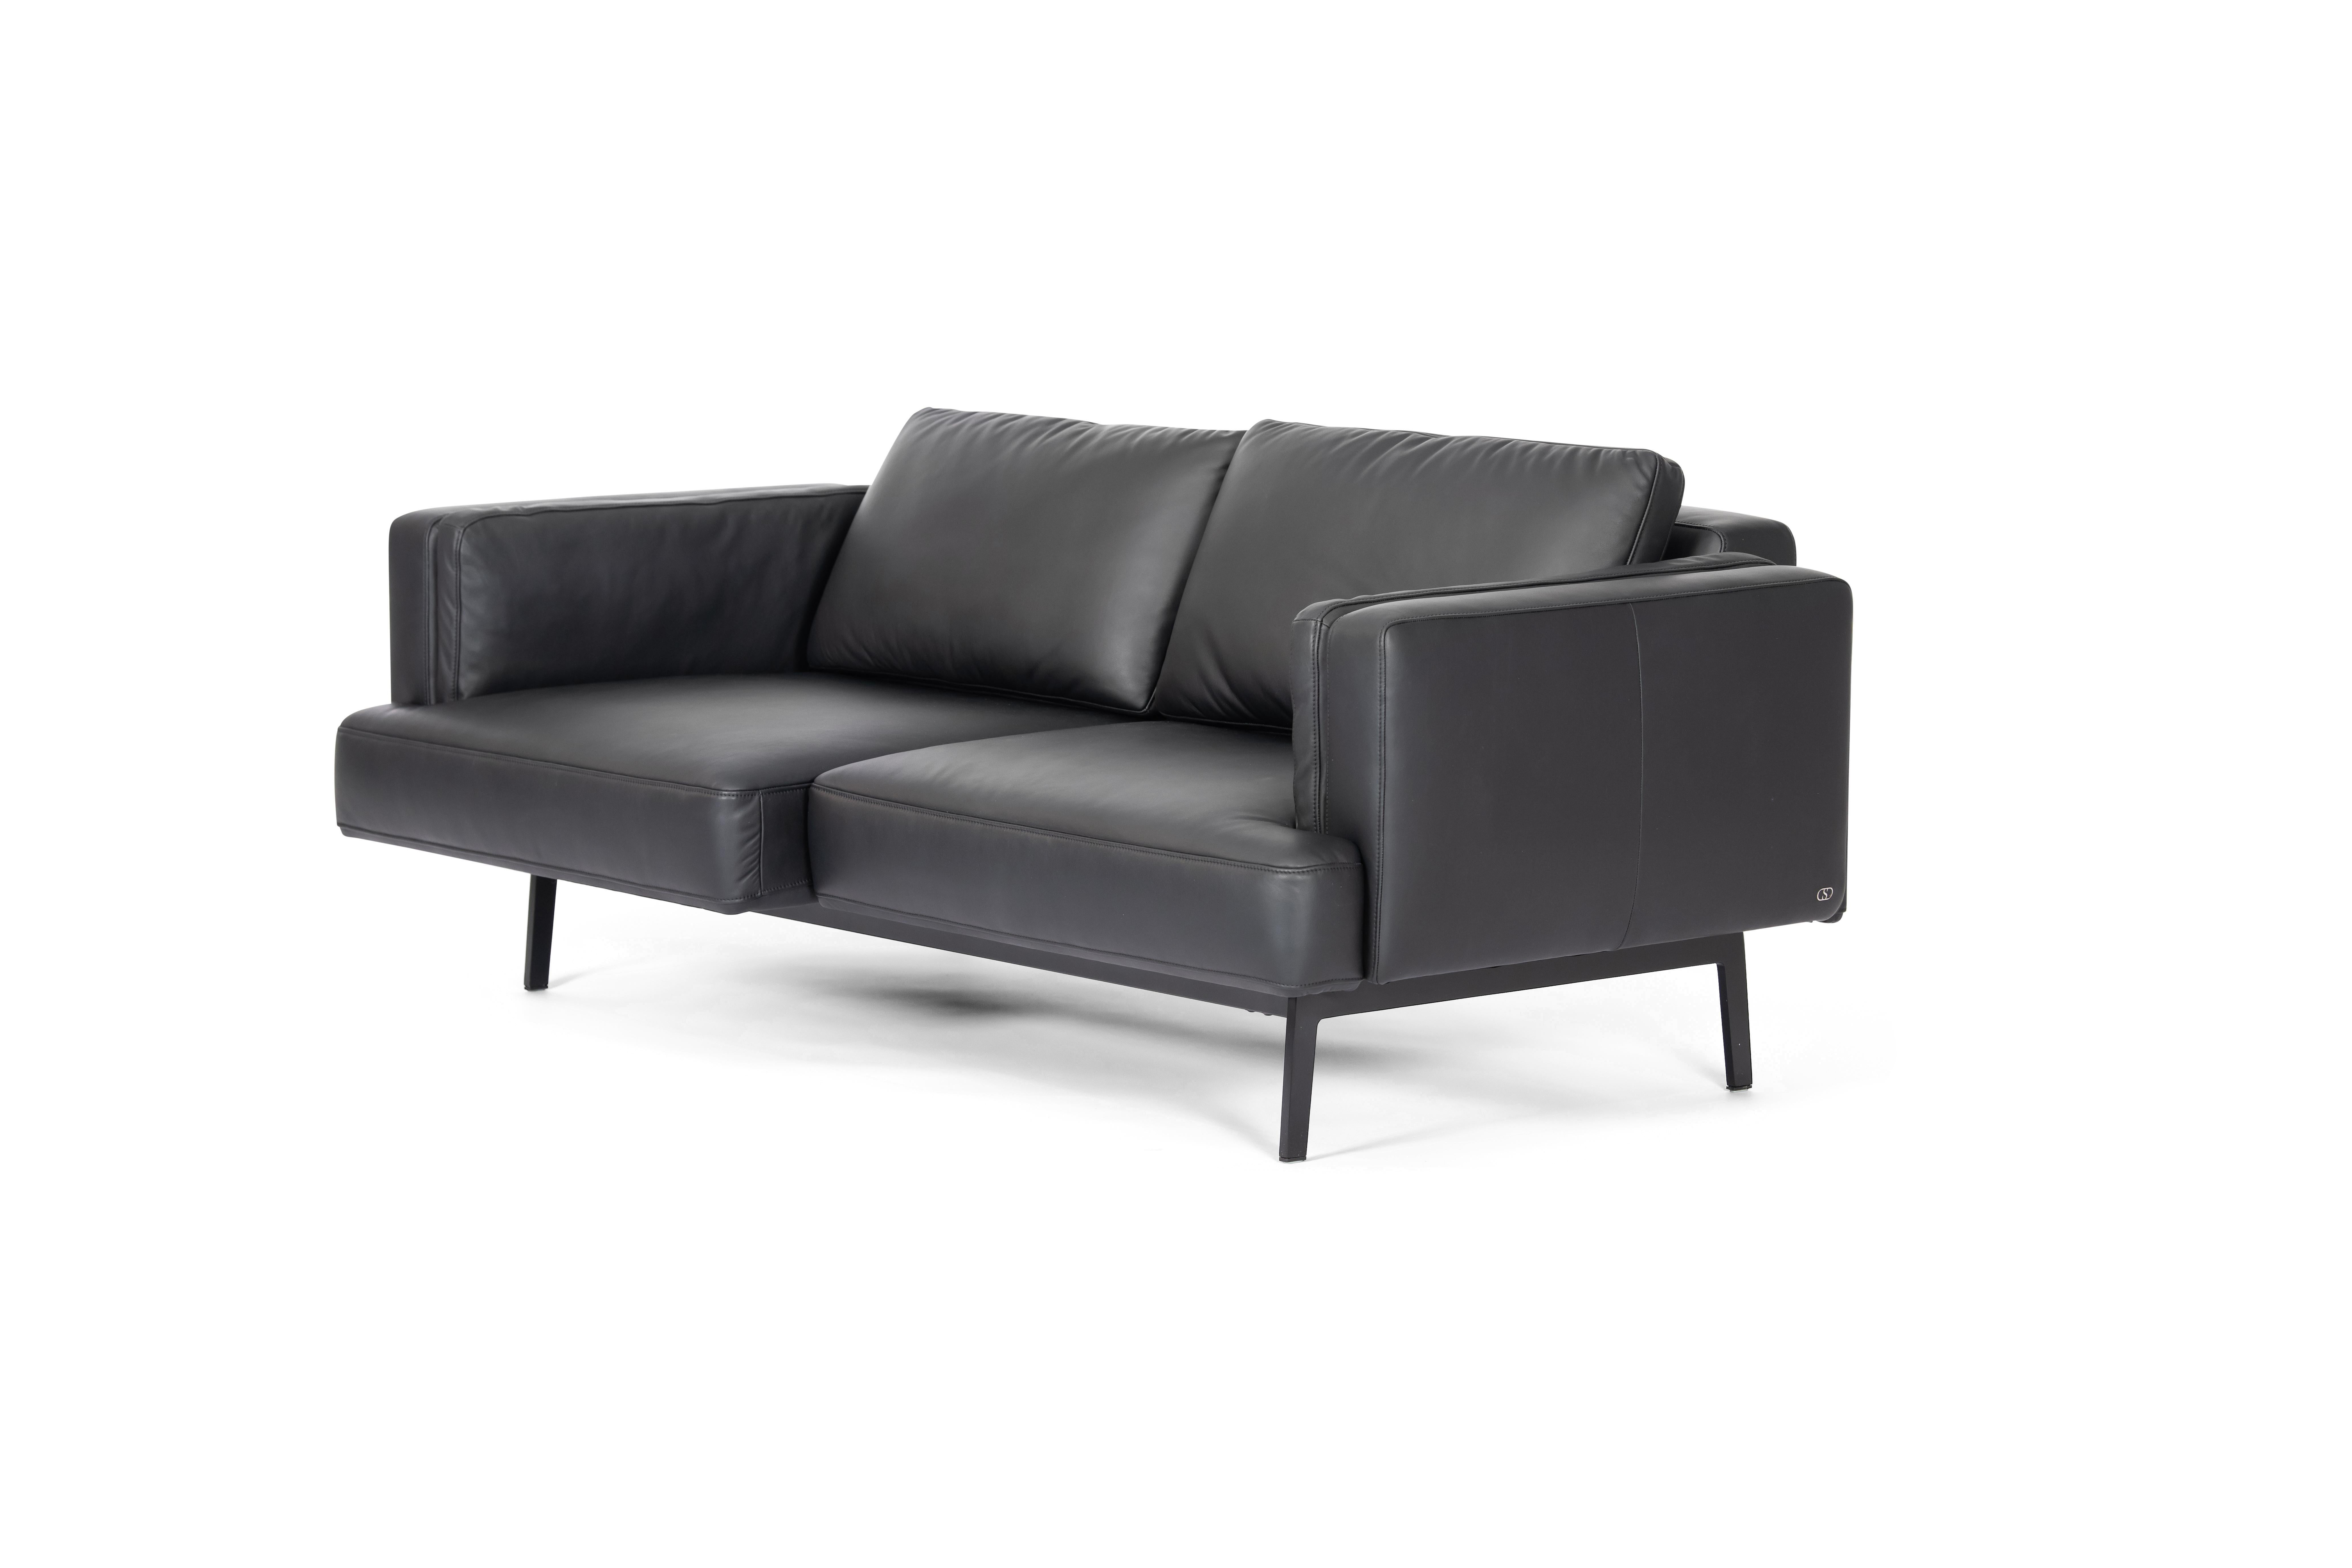 Swiss DeSede Ds-747/04 Multifunctional Sofa in Black Leather Seat and Back Upholstery For Sale